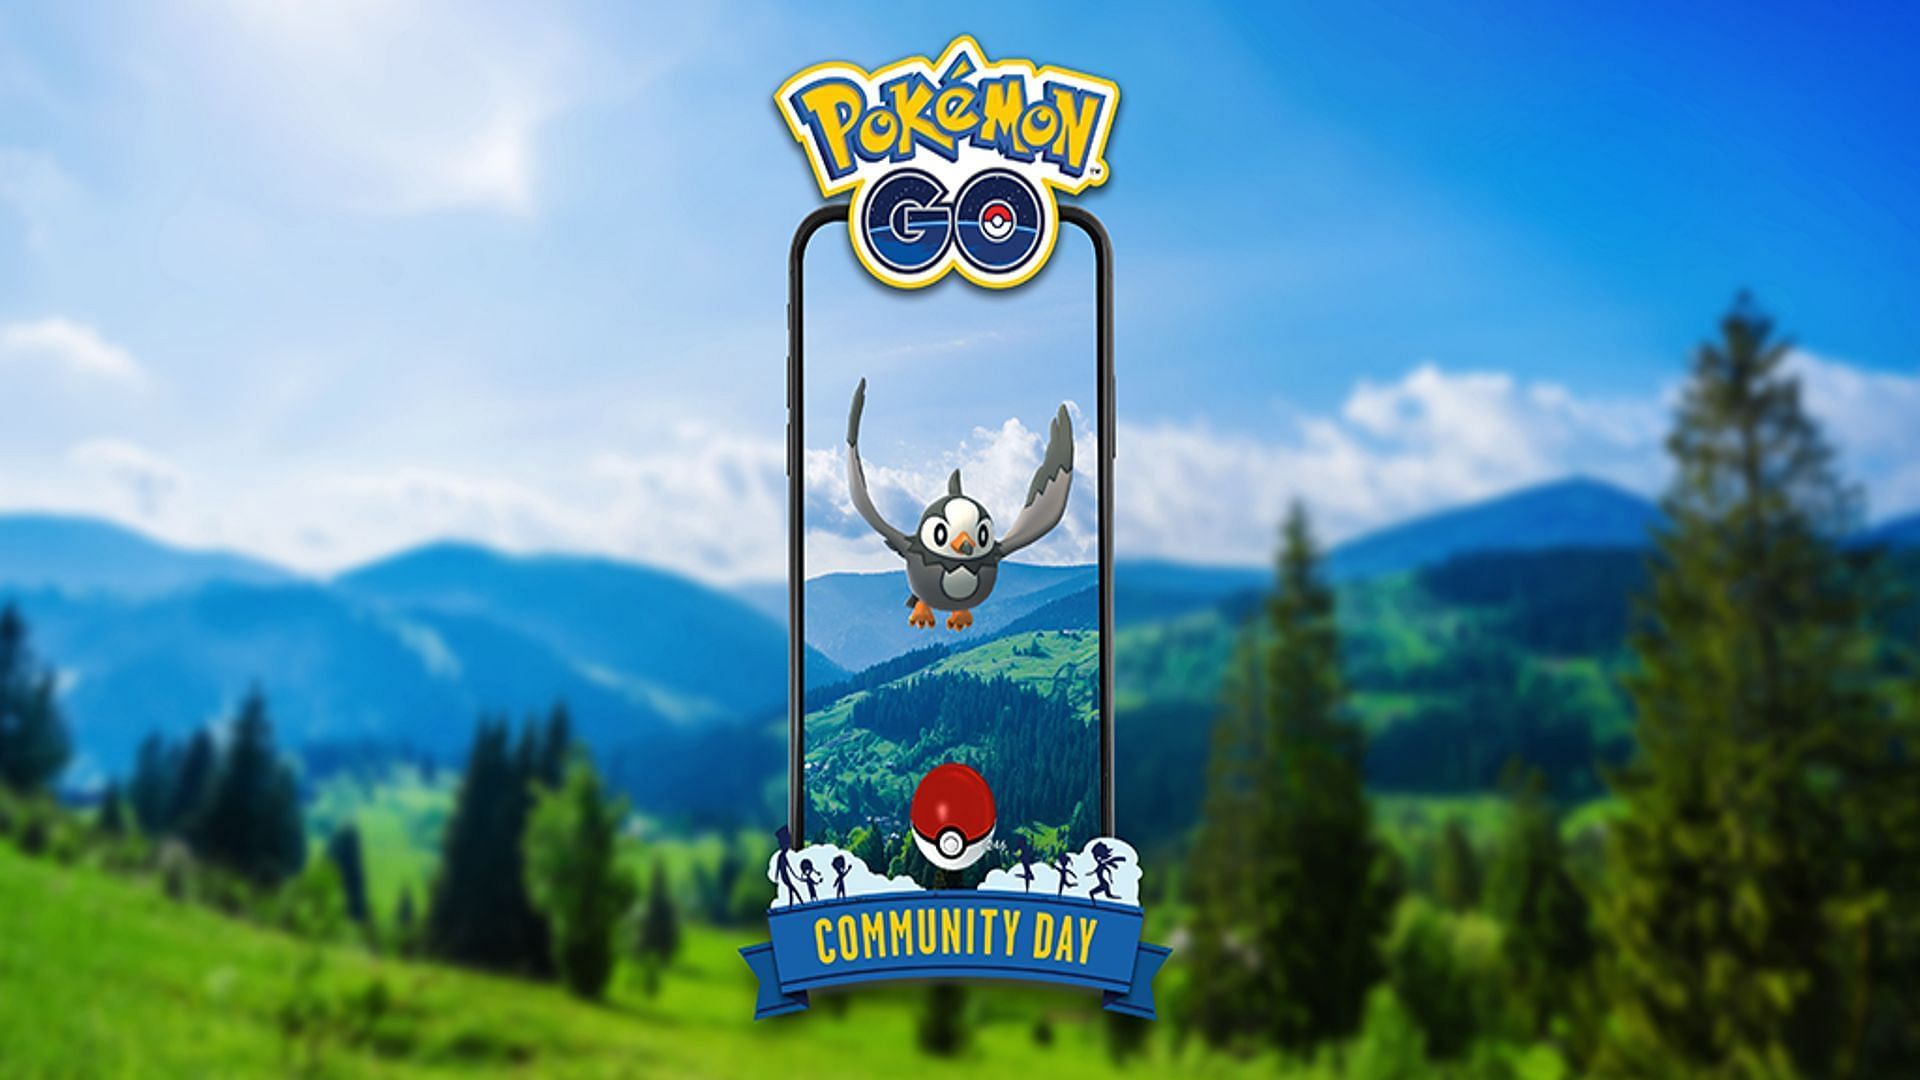 Official imagery for the Starly July 2022 Community Day event in Pokemon GO (Image via Niantic)